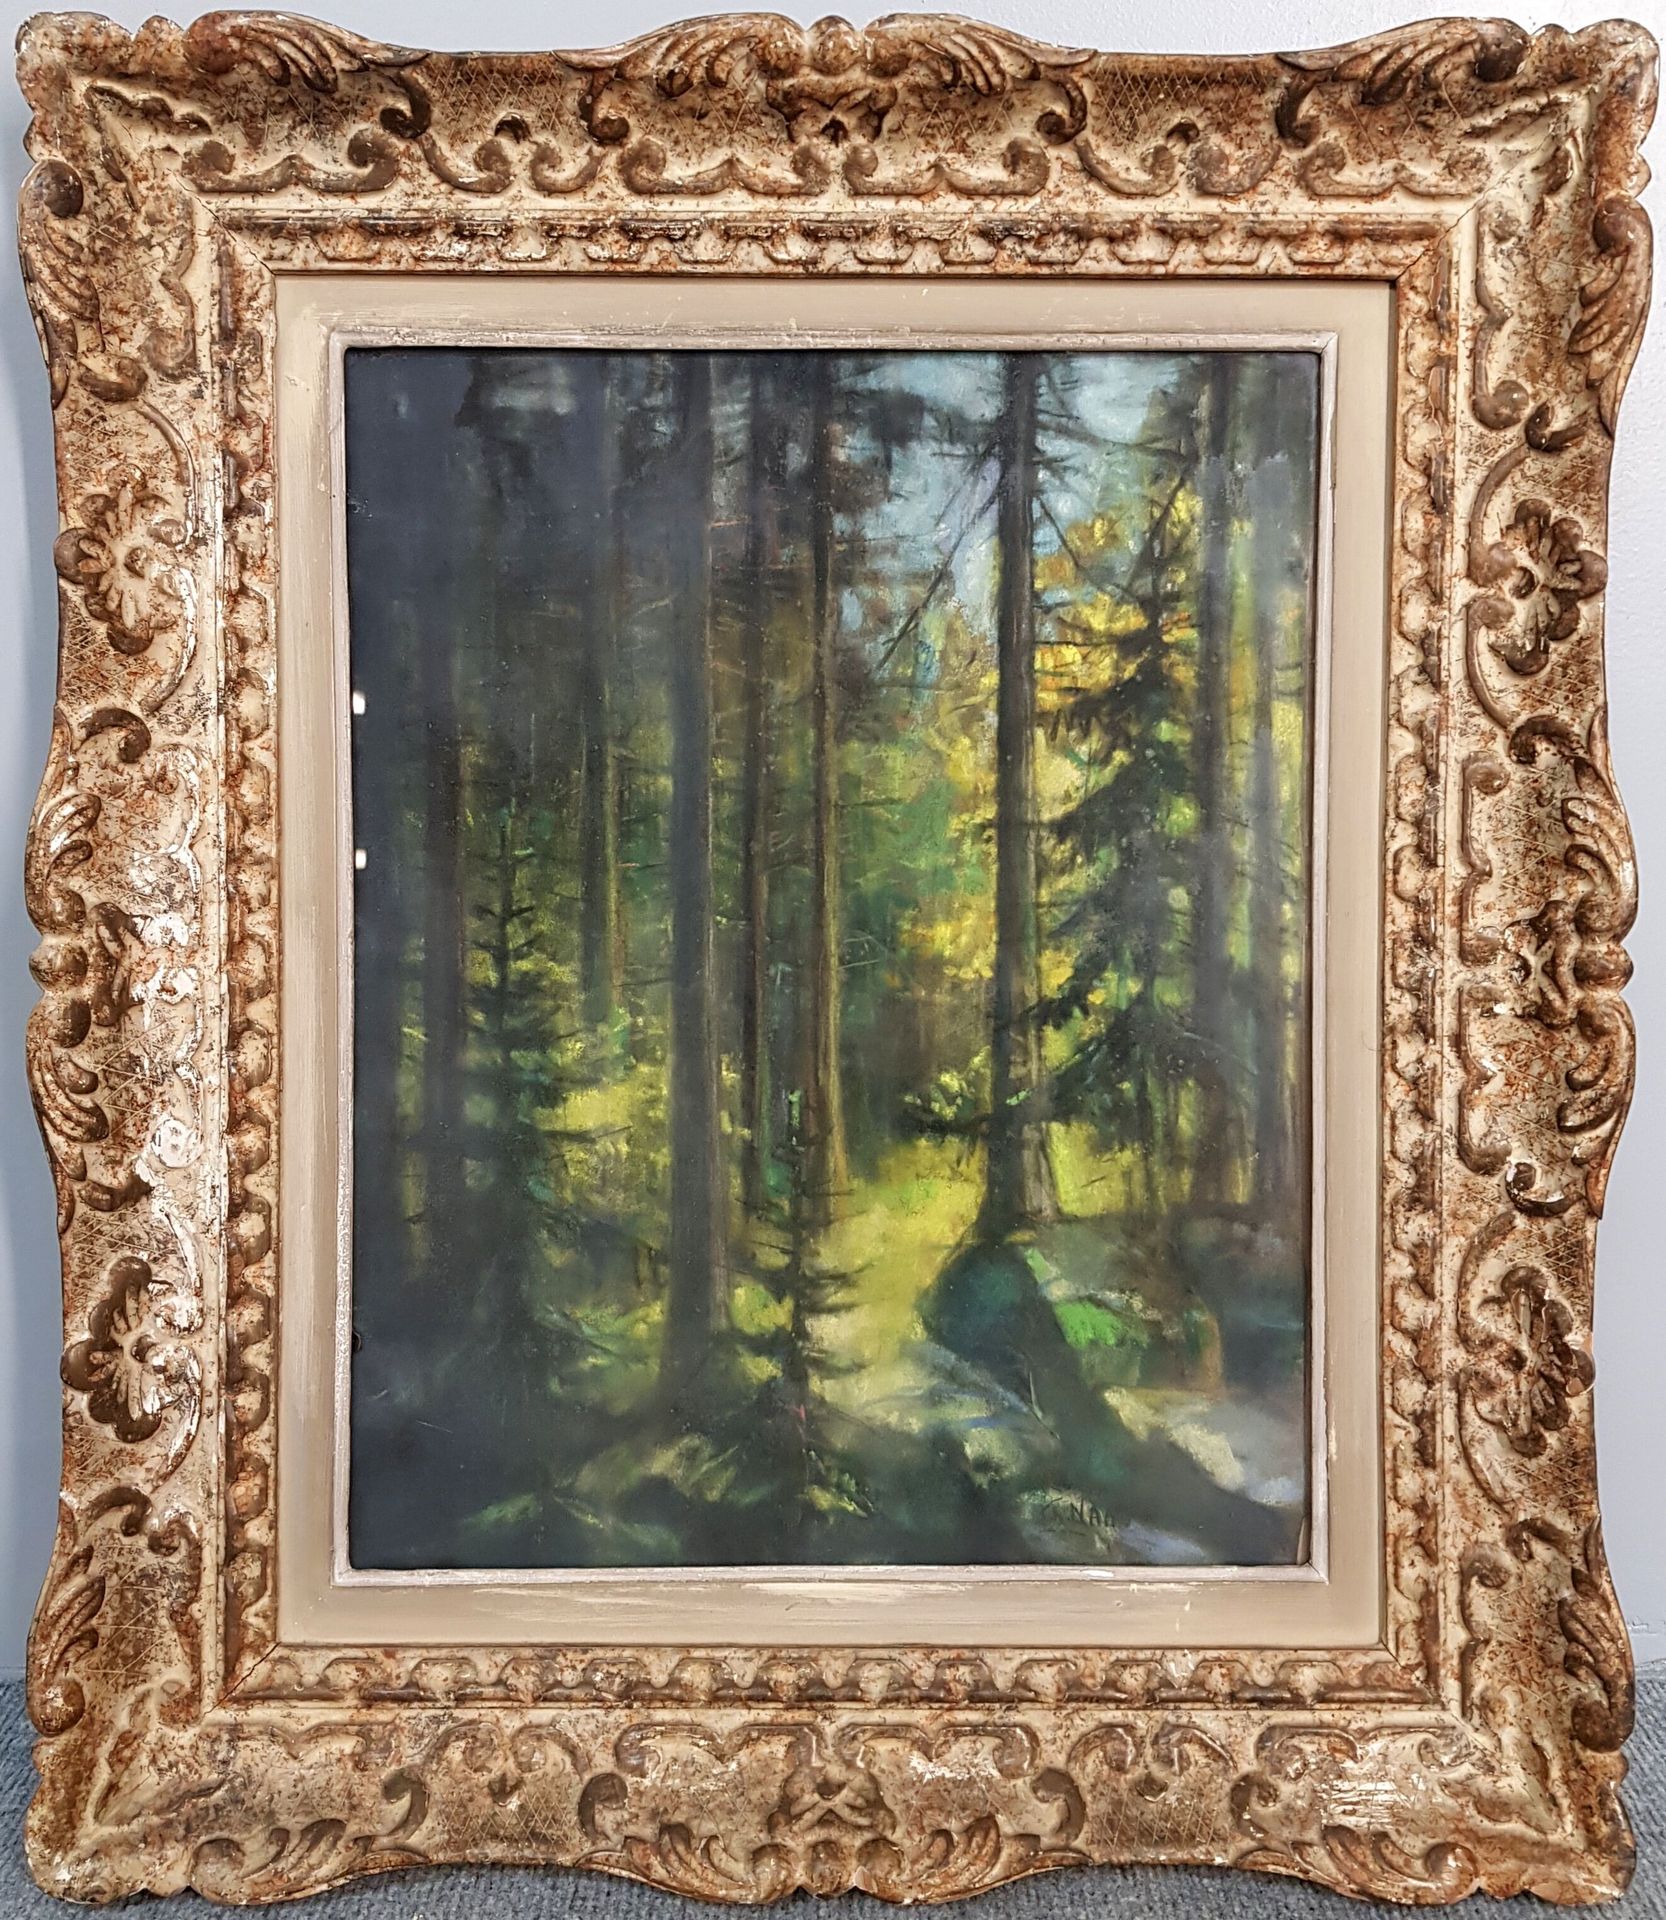 Null Charles NAAS (1905-?) 
"Under the woods".
Pastel
Signed lower right
H 39 x &hellip;